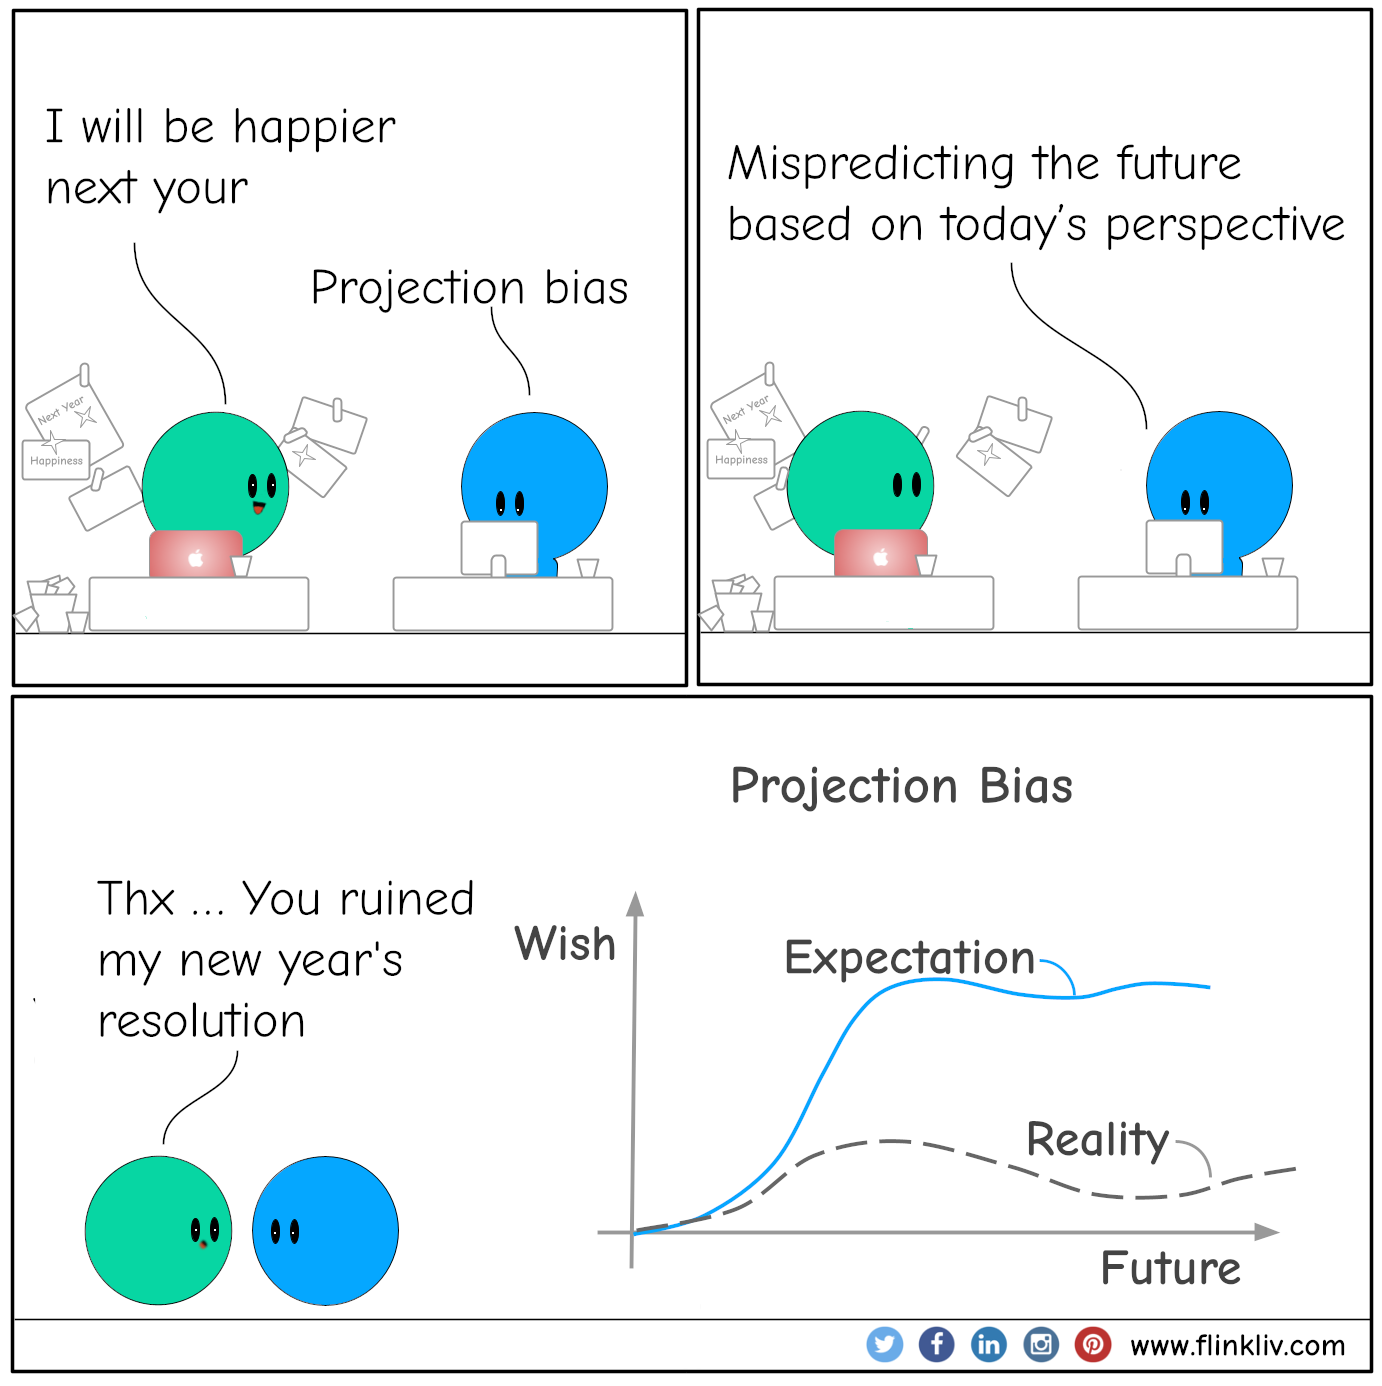 Conversation between A and B about projection bias.
            A: I will be happier next your
				B: Projection bias
				B: Mispredicting the future based on today's perspective
				A: You ruined my new year's resolution
			